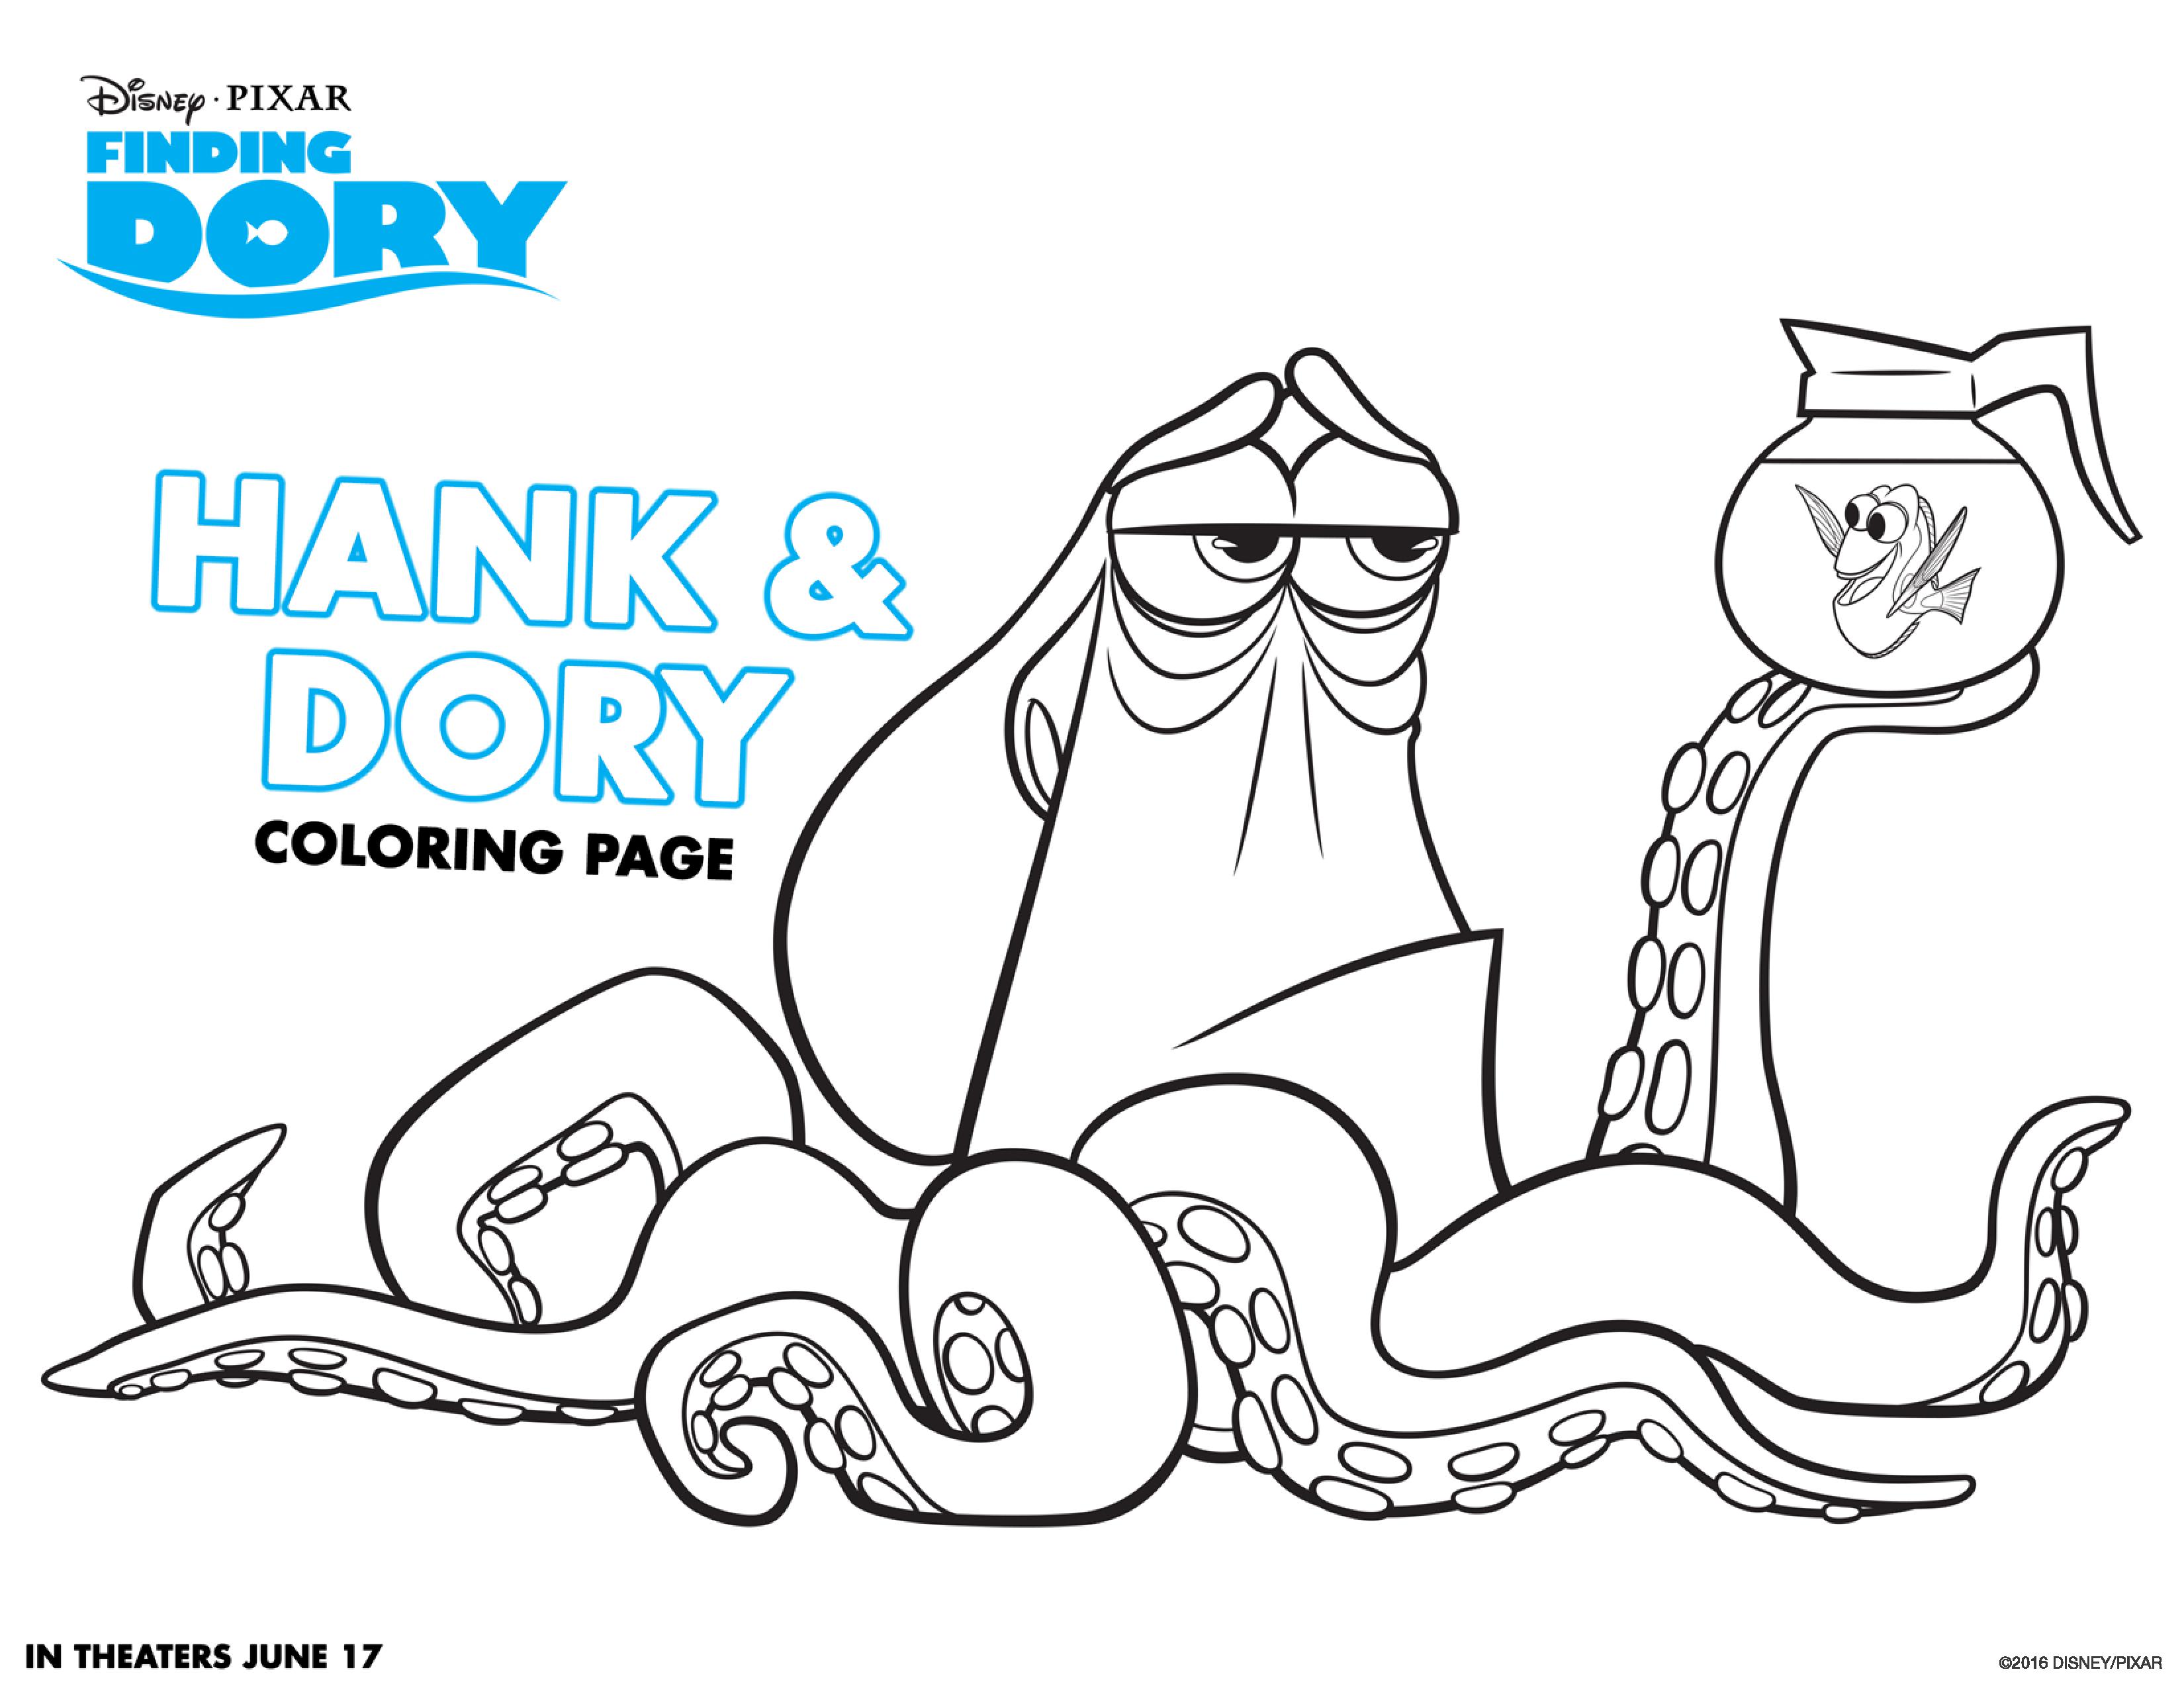 Hank and Dory Coloring Page